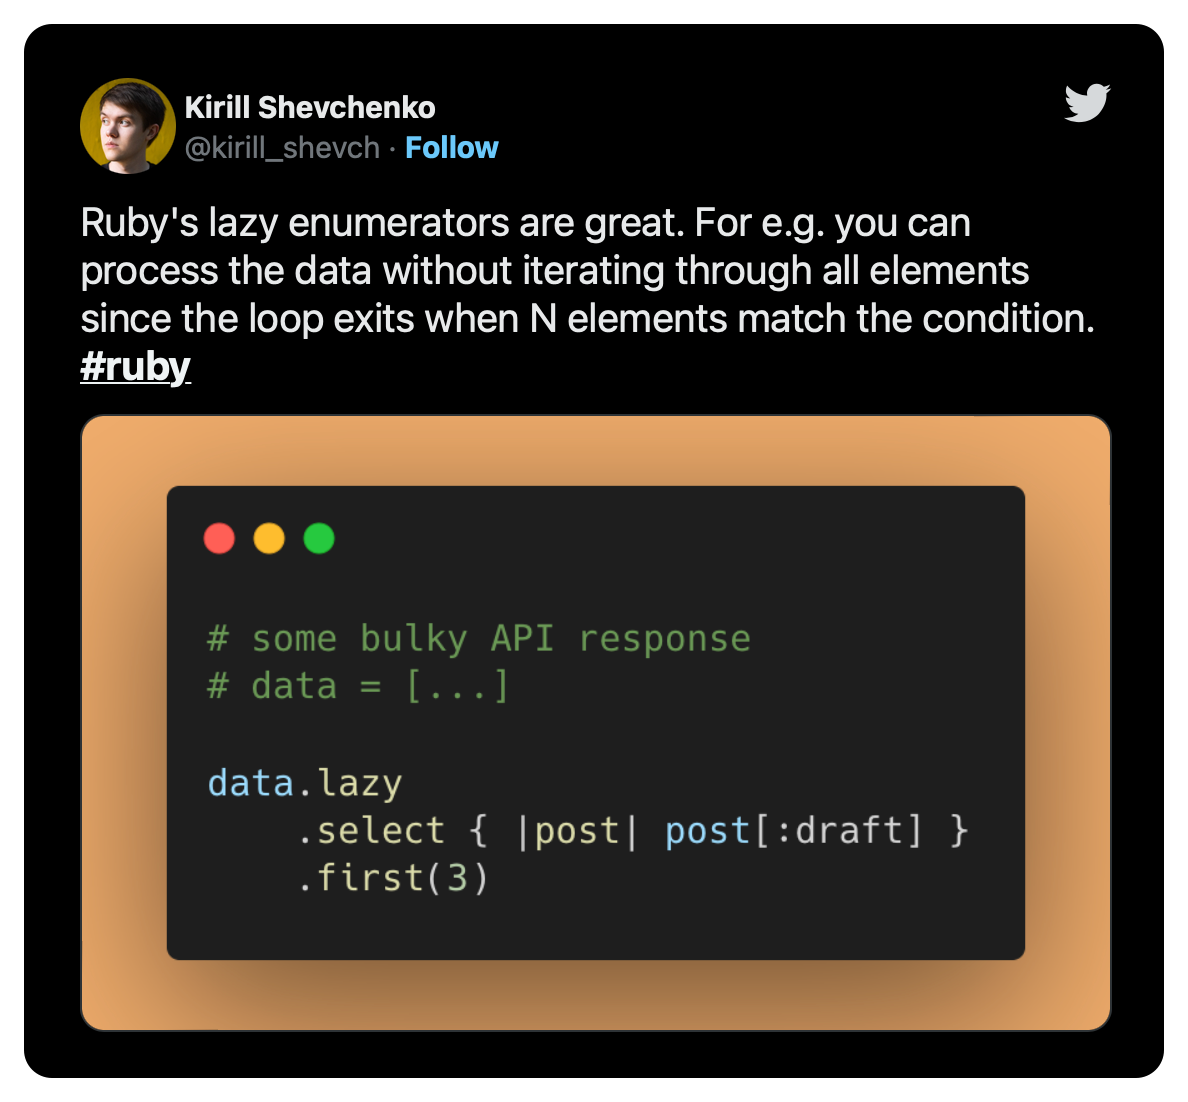 Ruby's lazy enumerators are great. For e.g. you can process the data without iterating through all elements since the loop exits when N elements match the condition